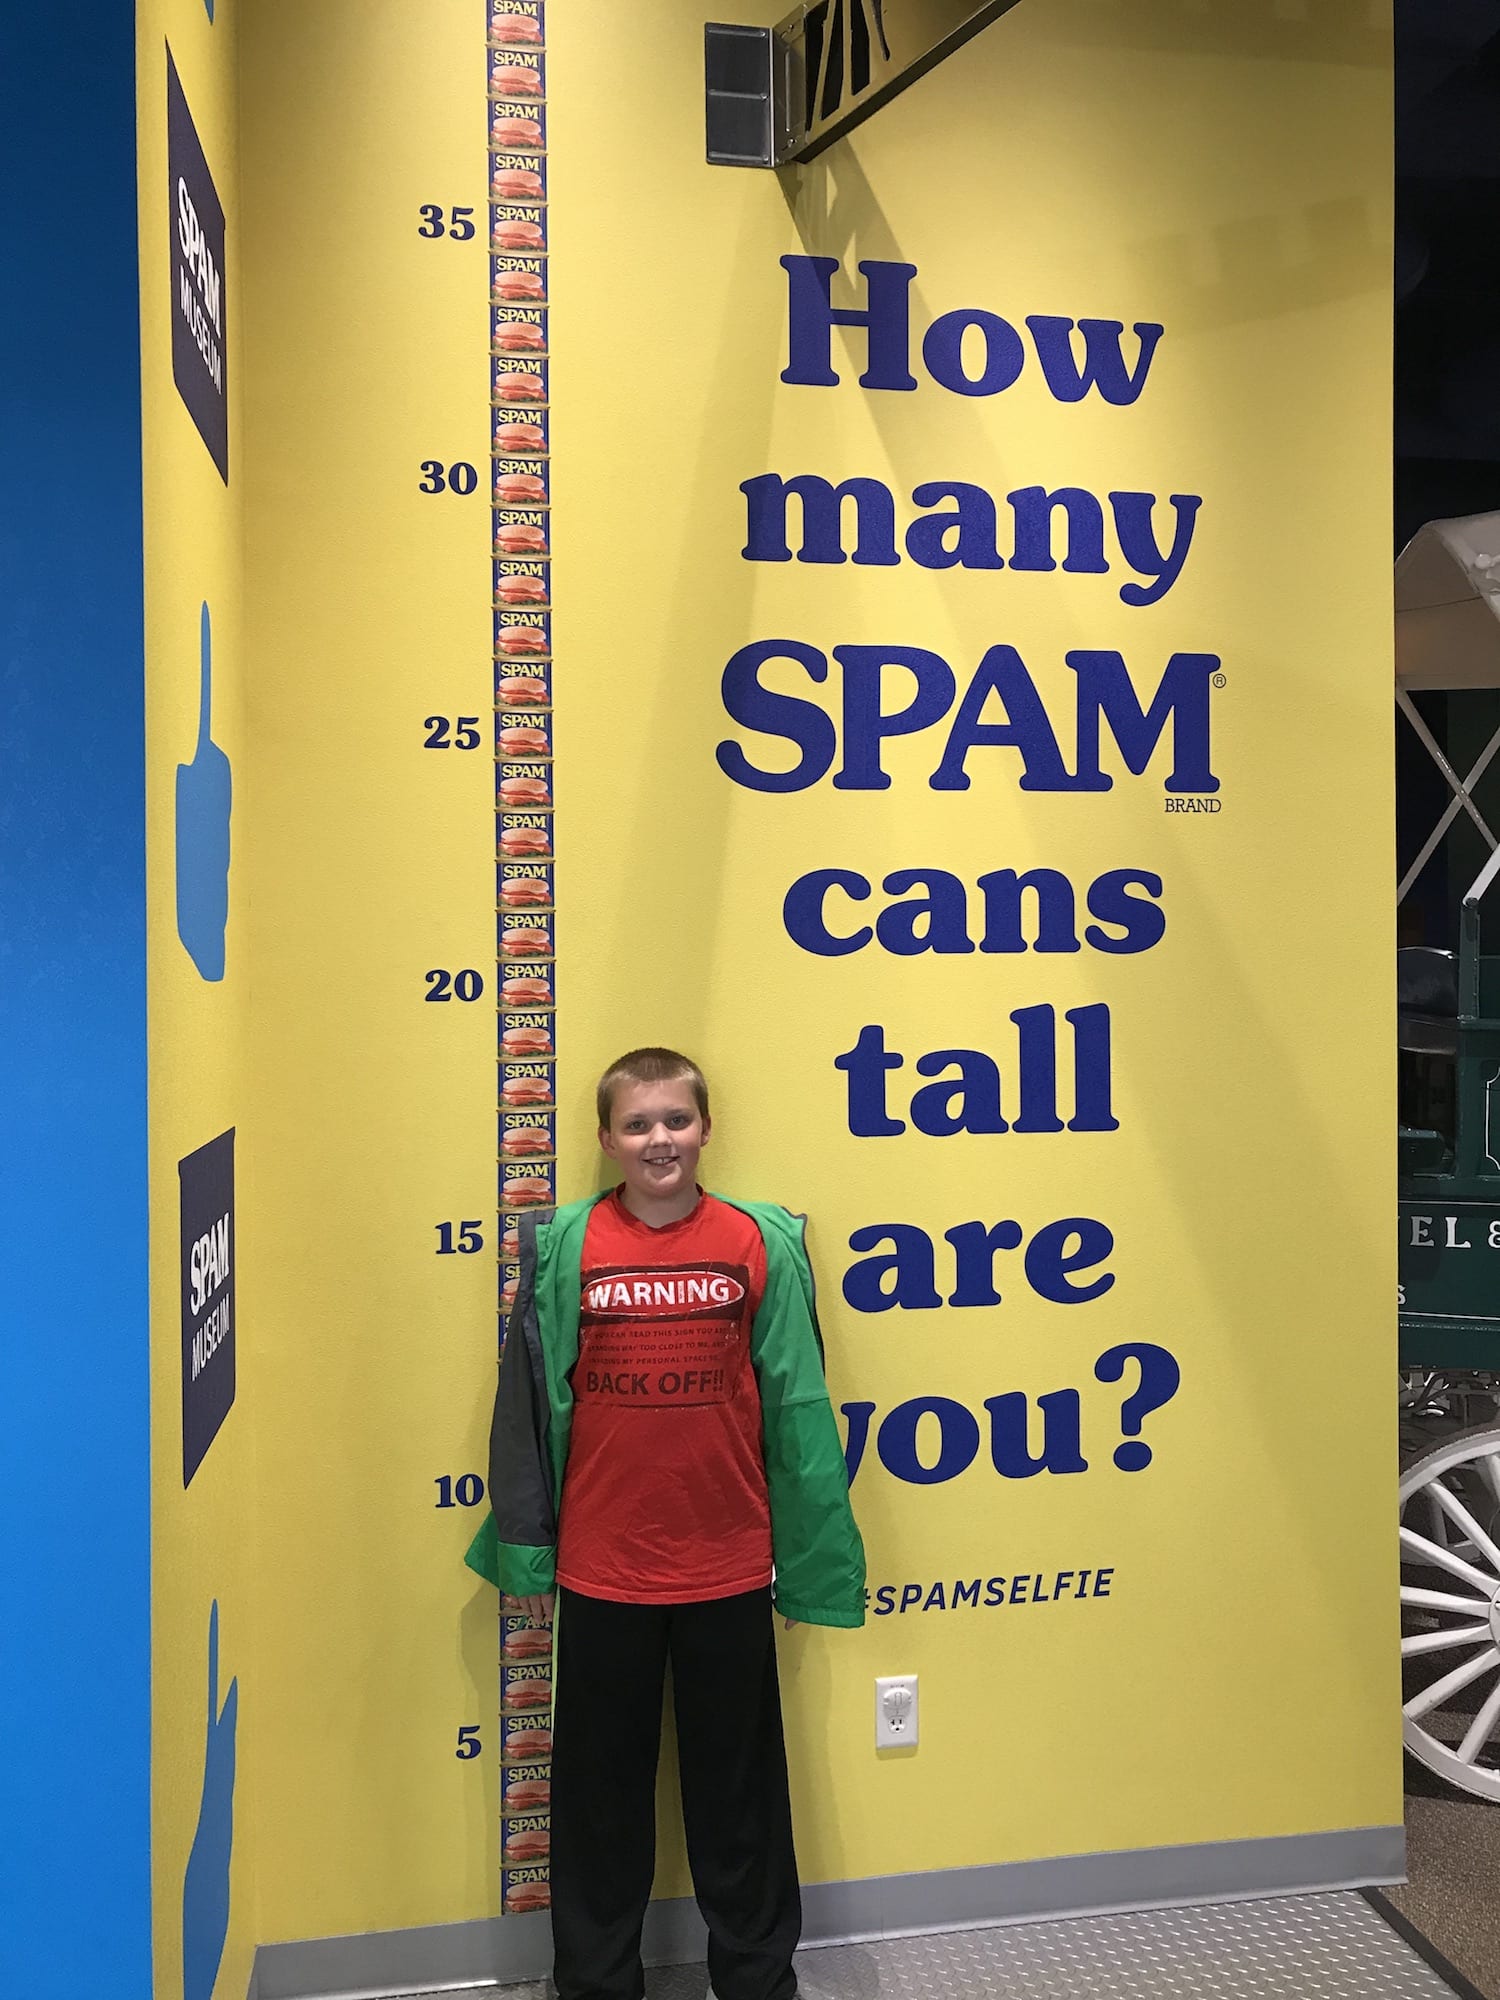 How many SPAM cans tall are you? Austin, Minnesota